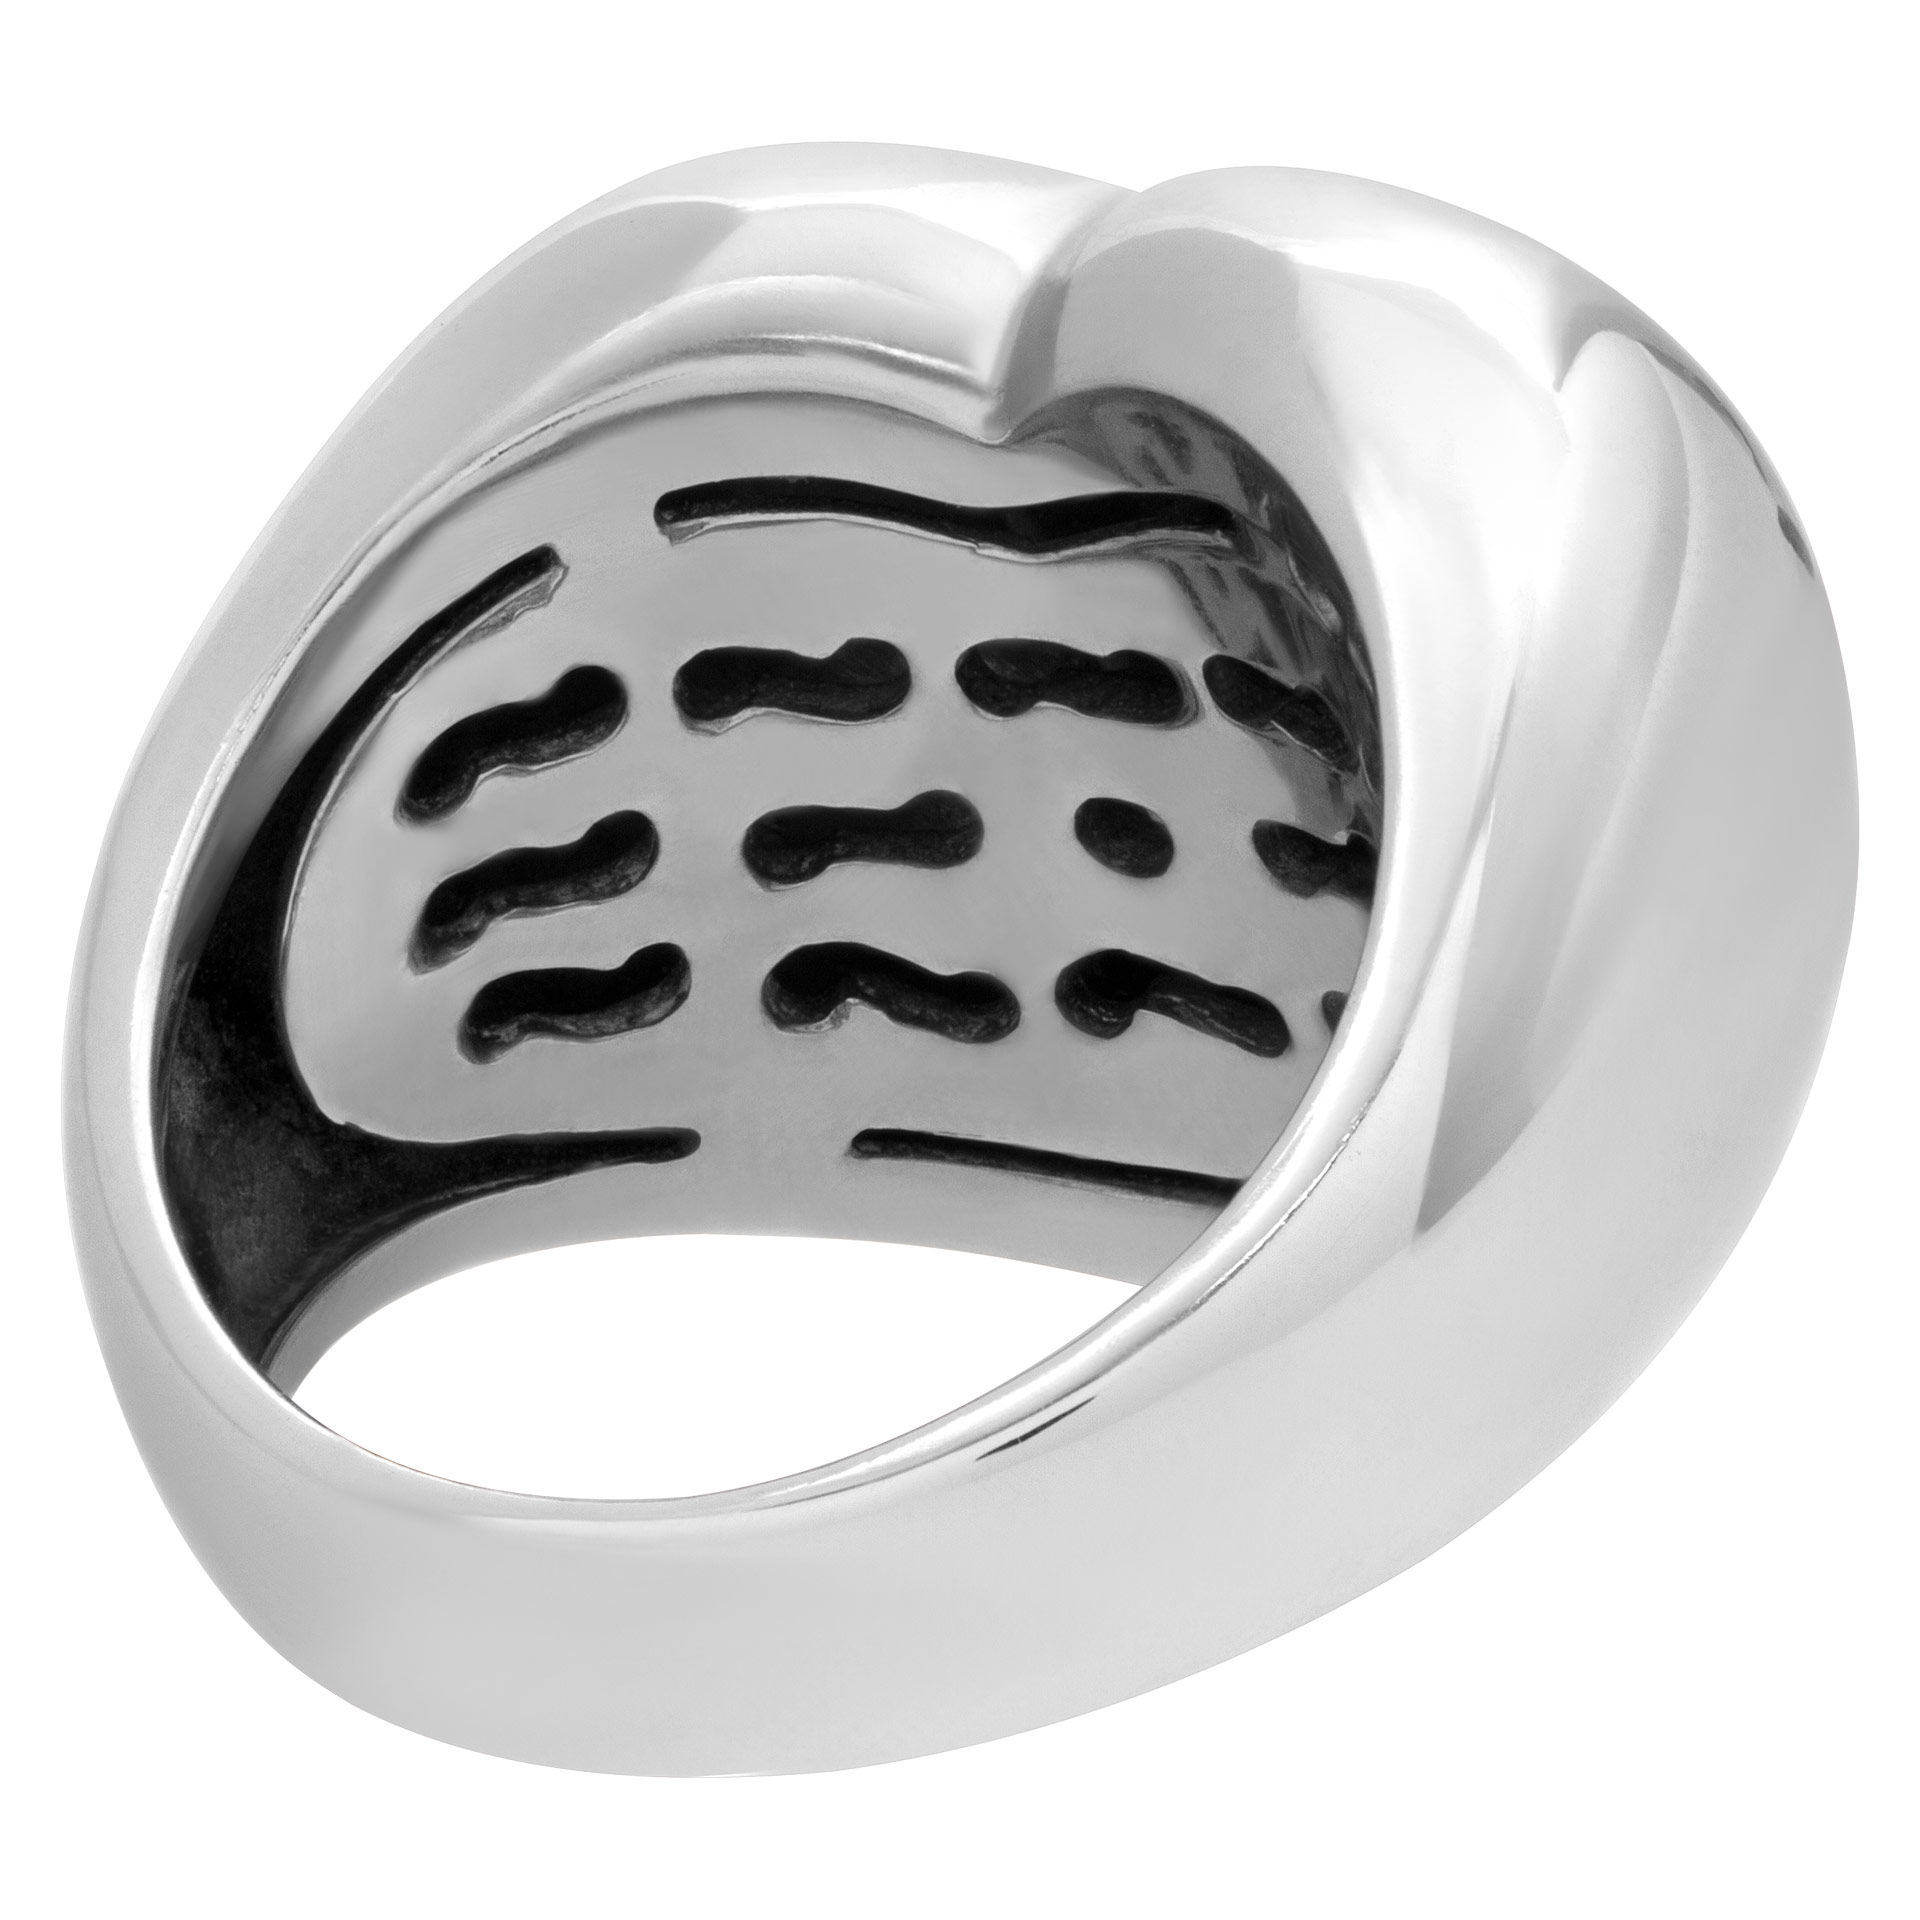 Pave diamond heart shaped ring in 18k white gold. Size 7 image 5